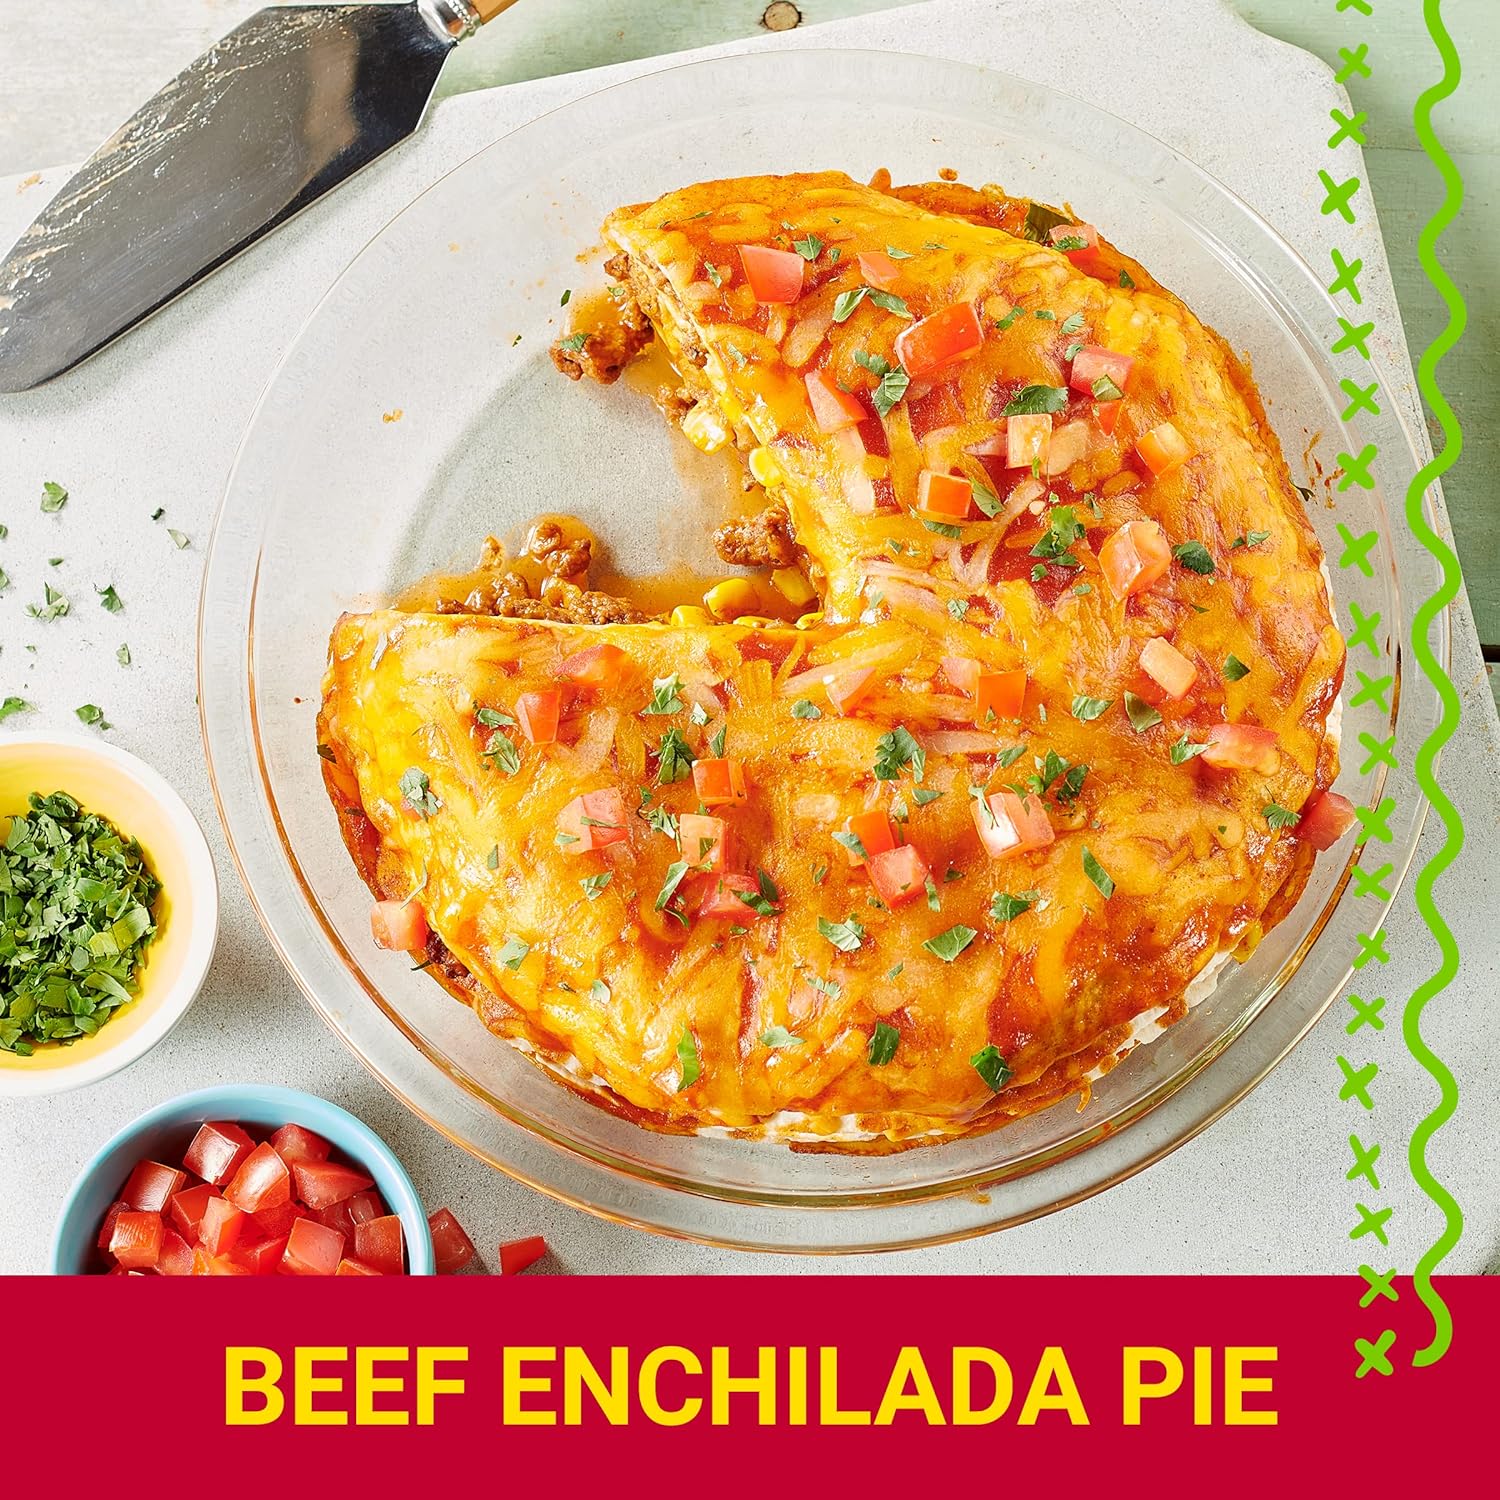 Old El Paso Medium Red Enchilada Sauce, 1 ct., 10 oz. (Pack of 12) : Packaged Mexican Enchiladas Kits : Everything Else